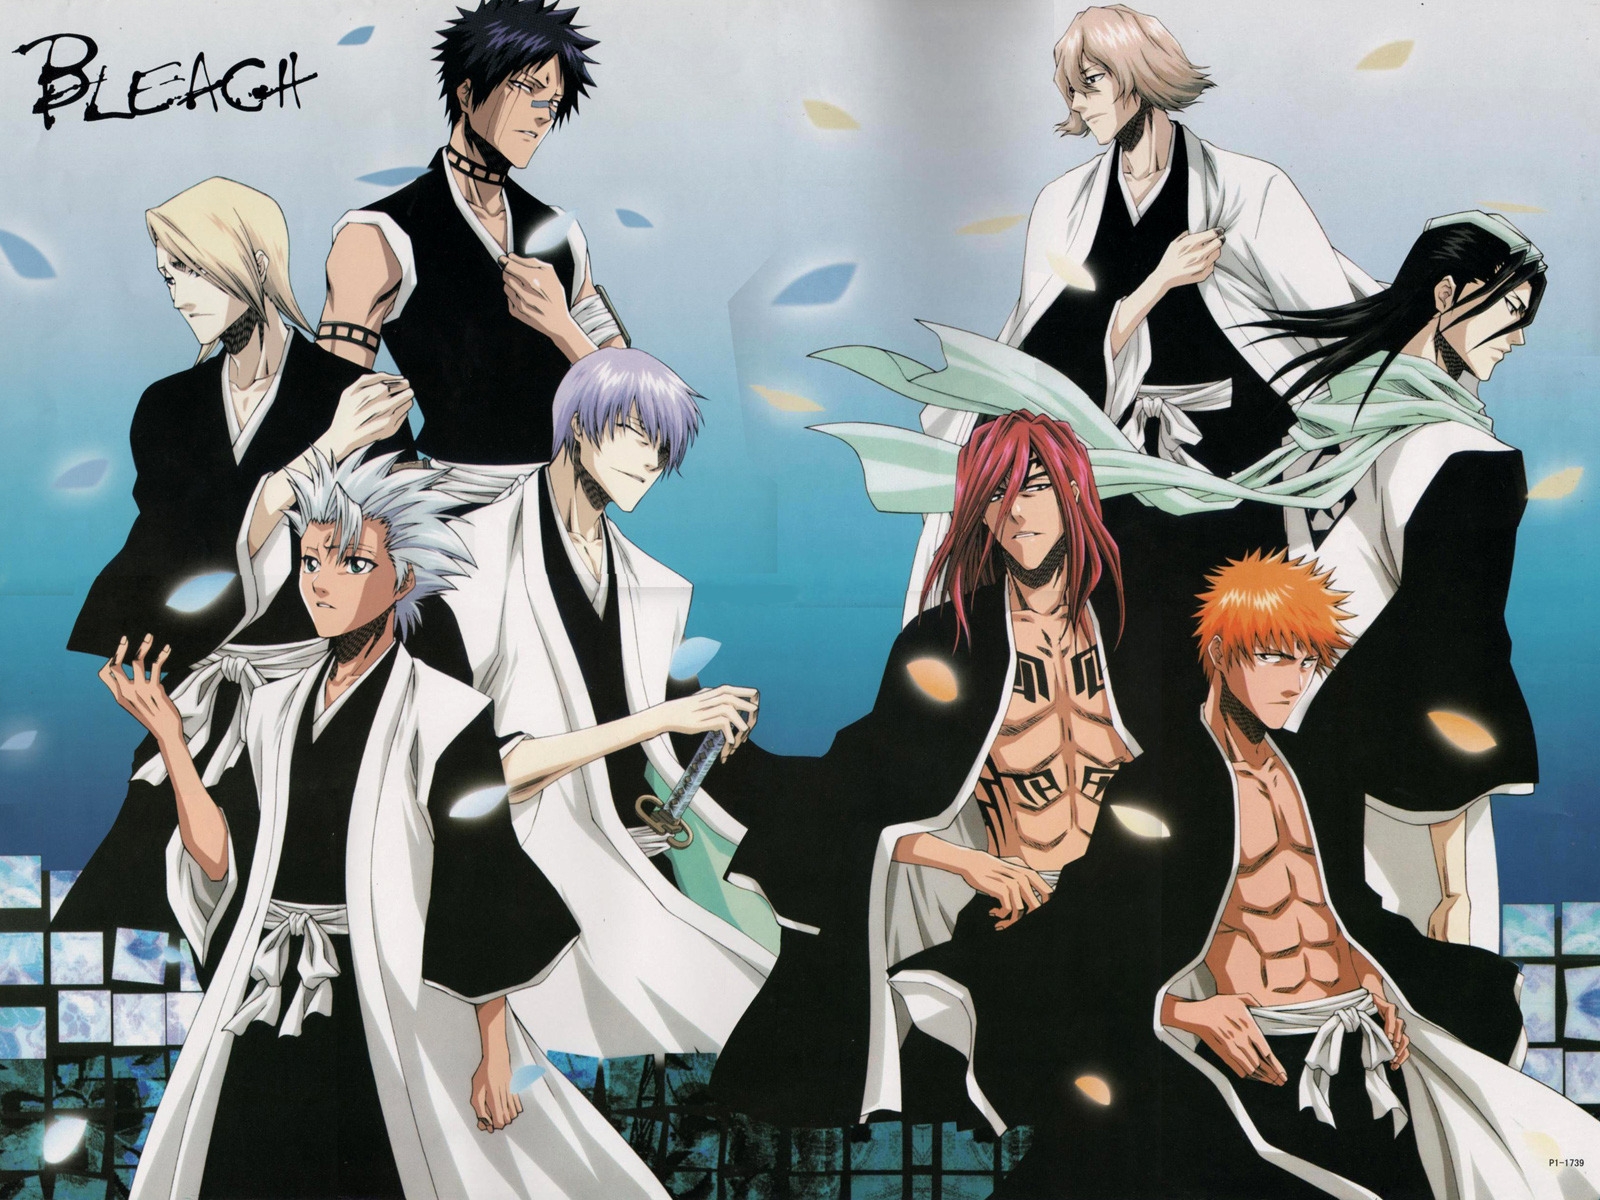 Bleach Anime Characters for 1600 x 1200 resolution